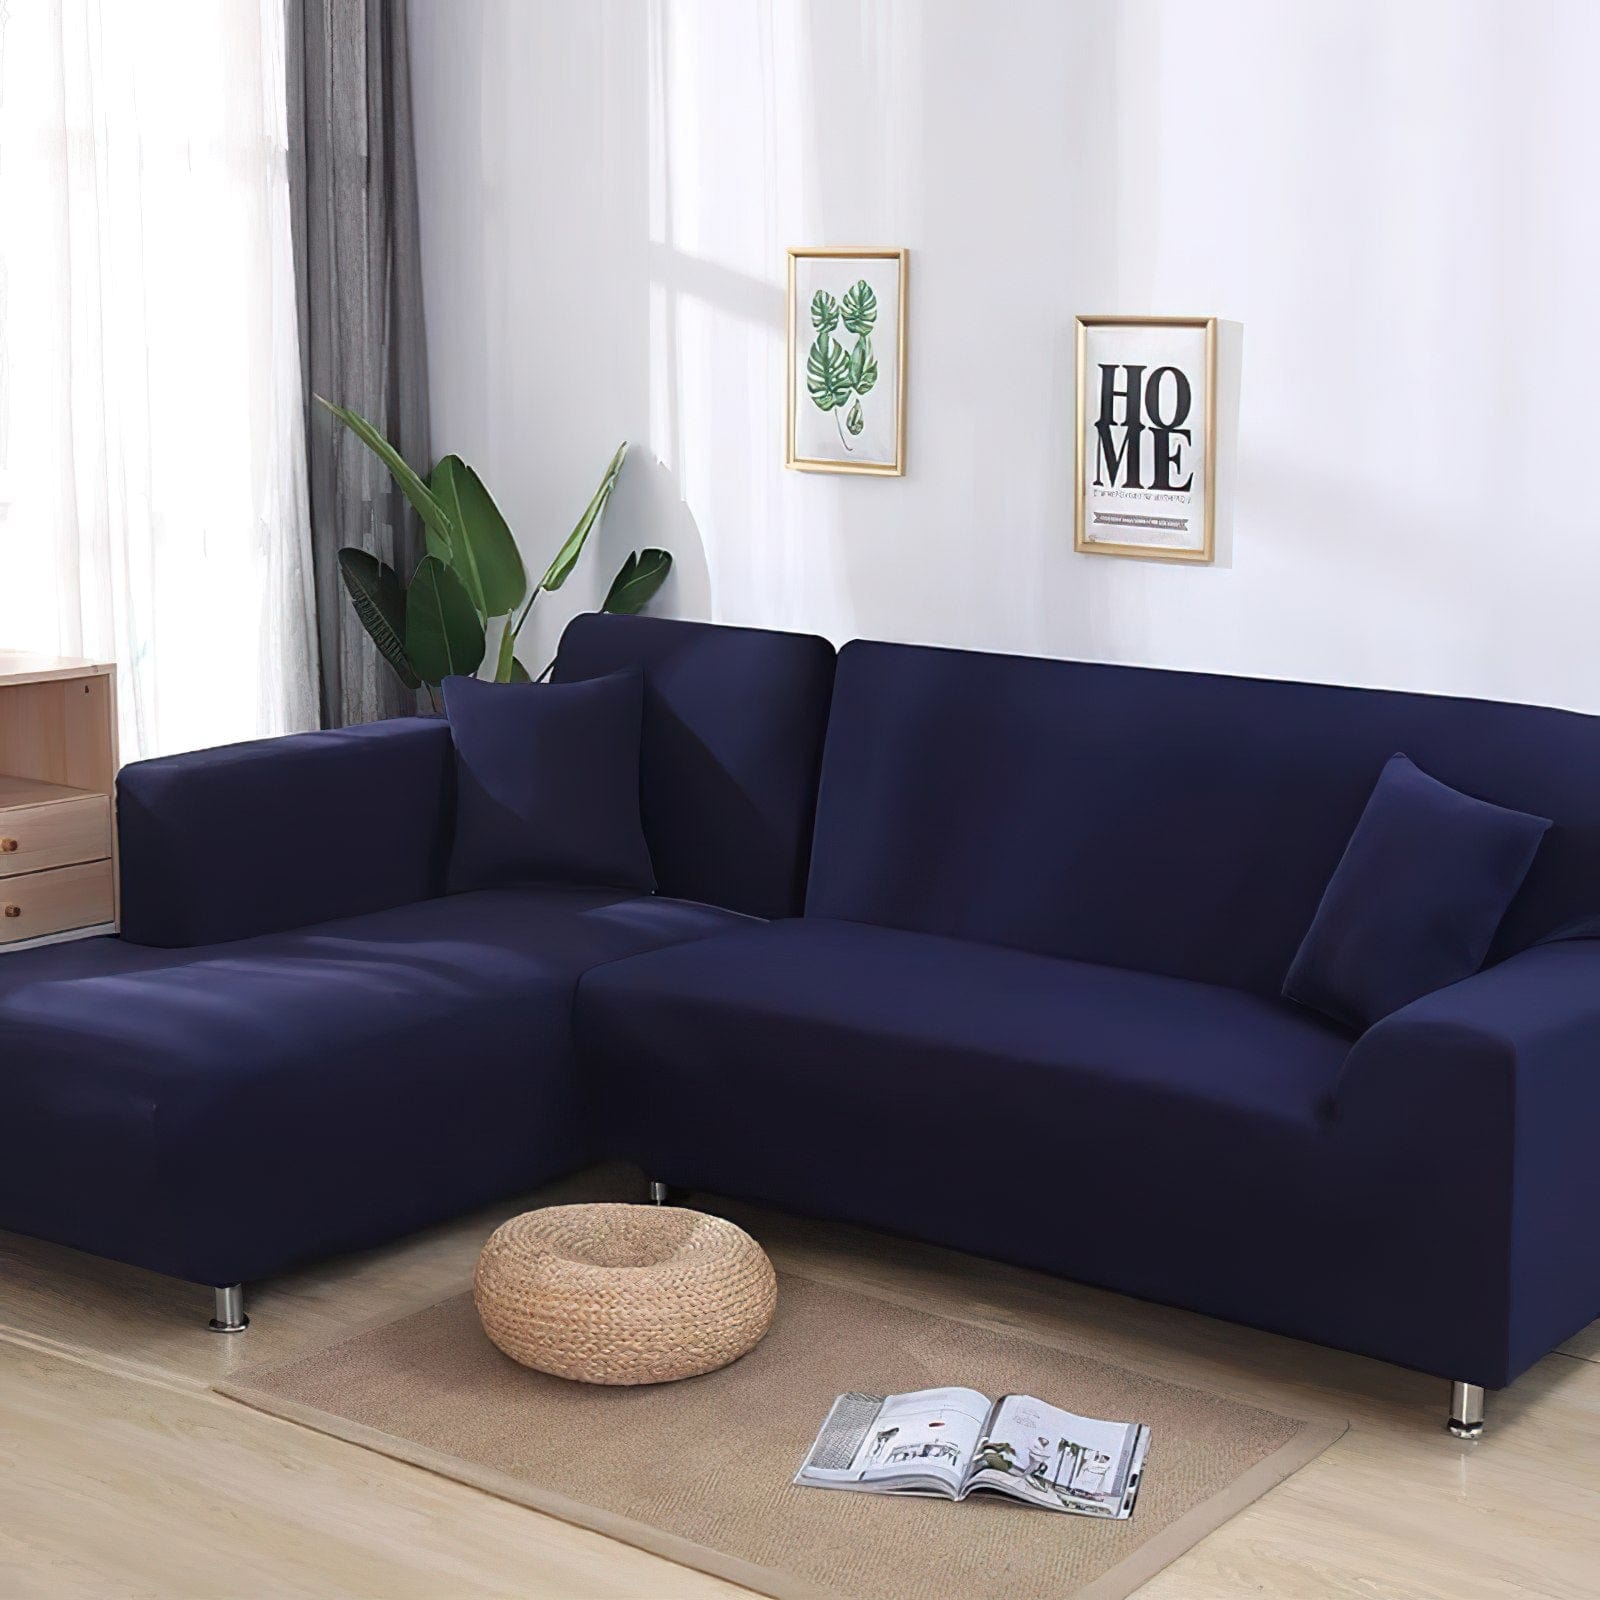 Navy blue - Extendable Armchair and Sofa Covers - The Sofa Cover House